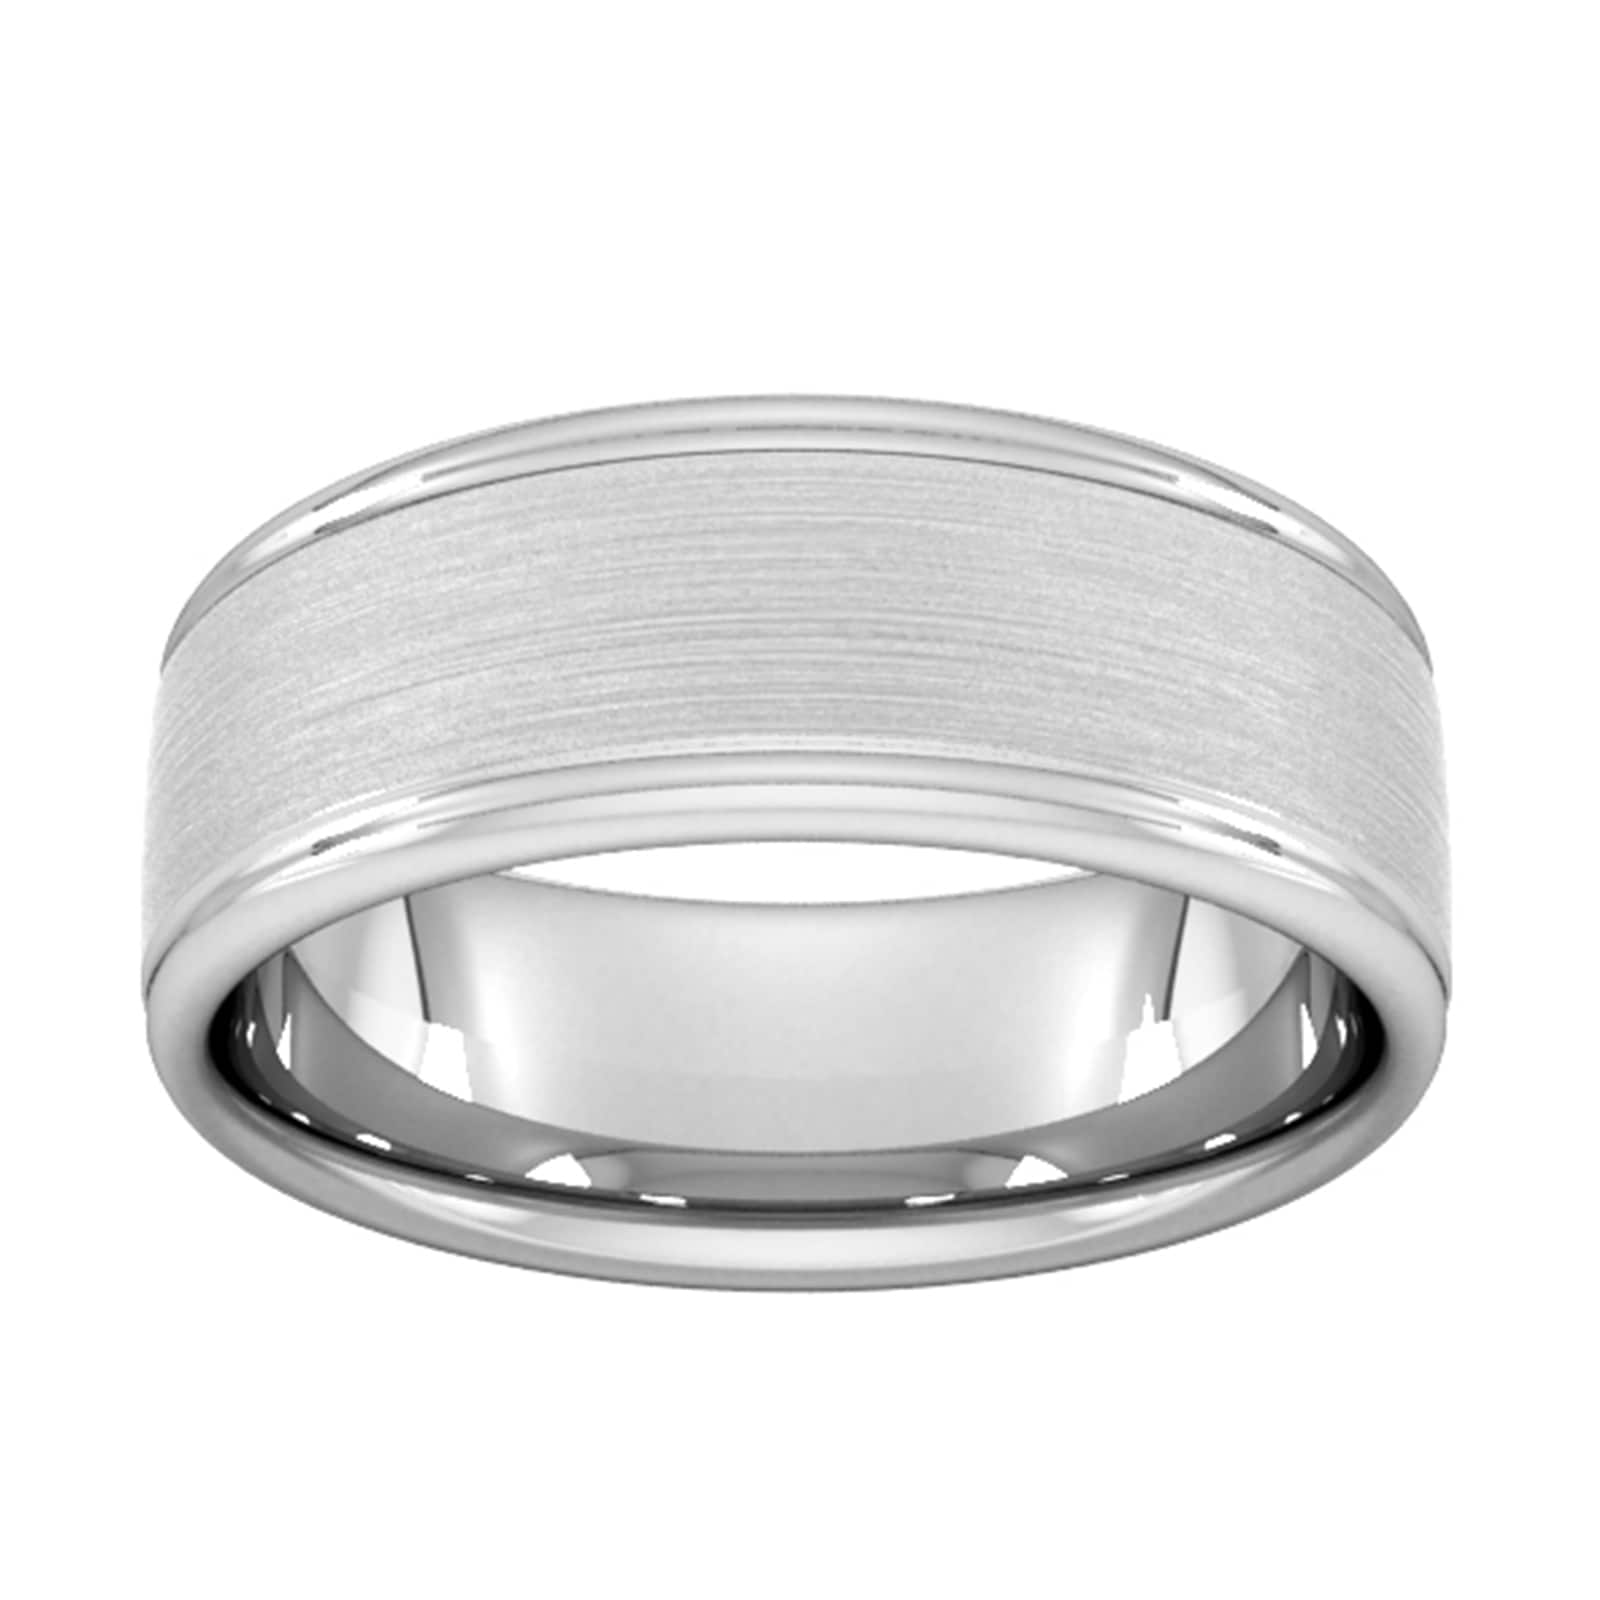 8mm Traditional Court Standard Matt Centre With Grooves Wedding Ring In 950 Palladium - Ring Size M